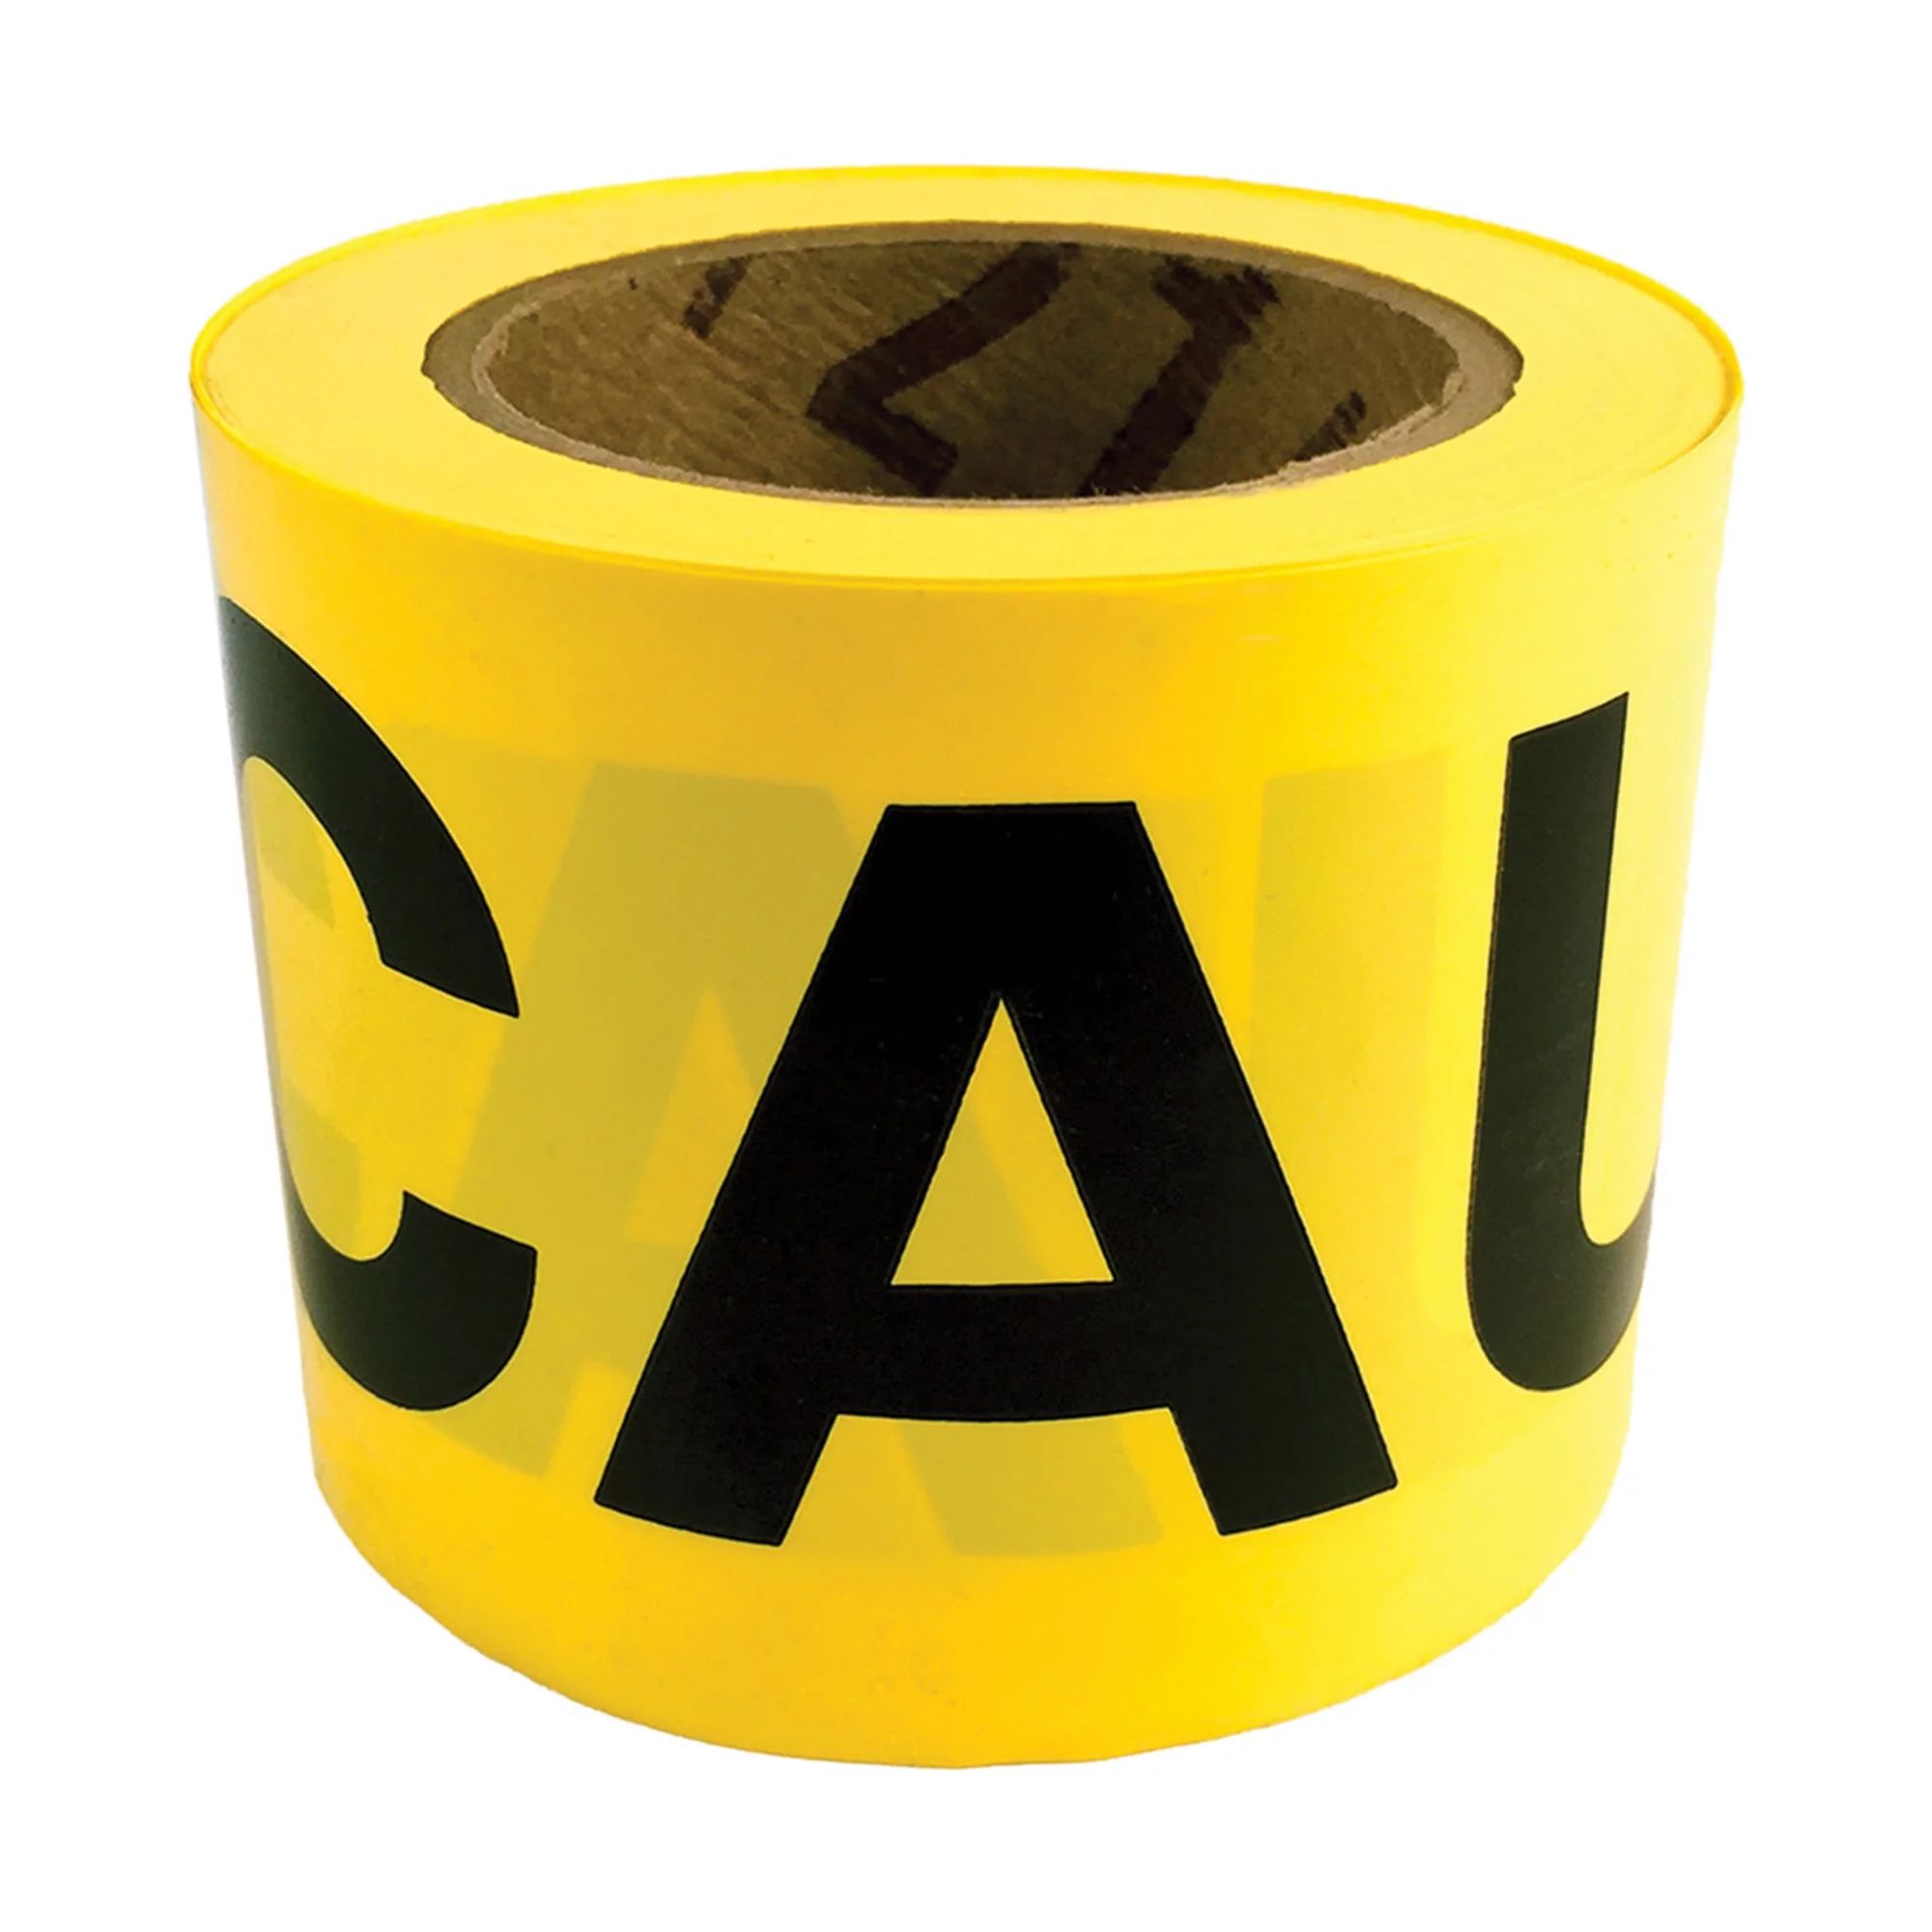 HY-KO Yellow Safety and Caution Tape, 3" x 200' Roll | Walmart (US)